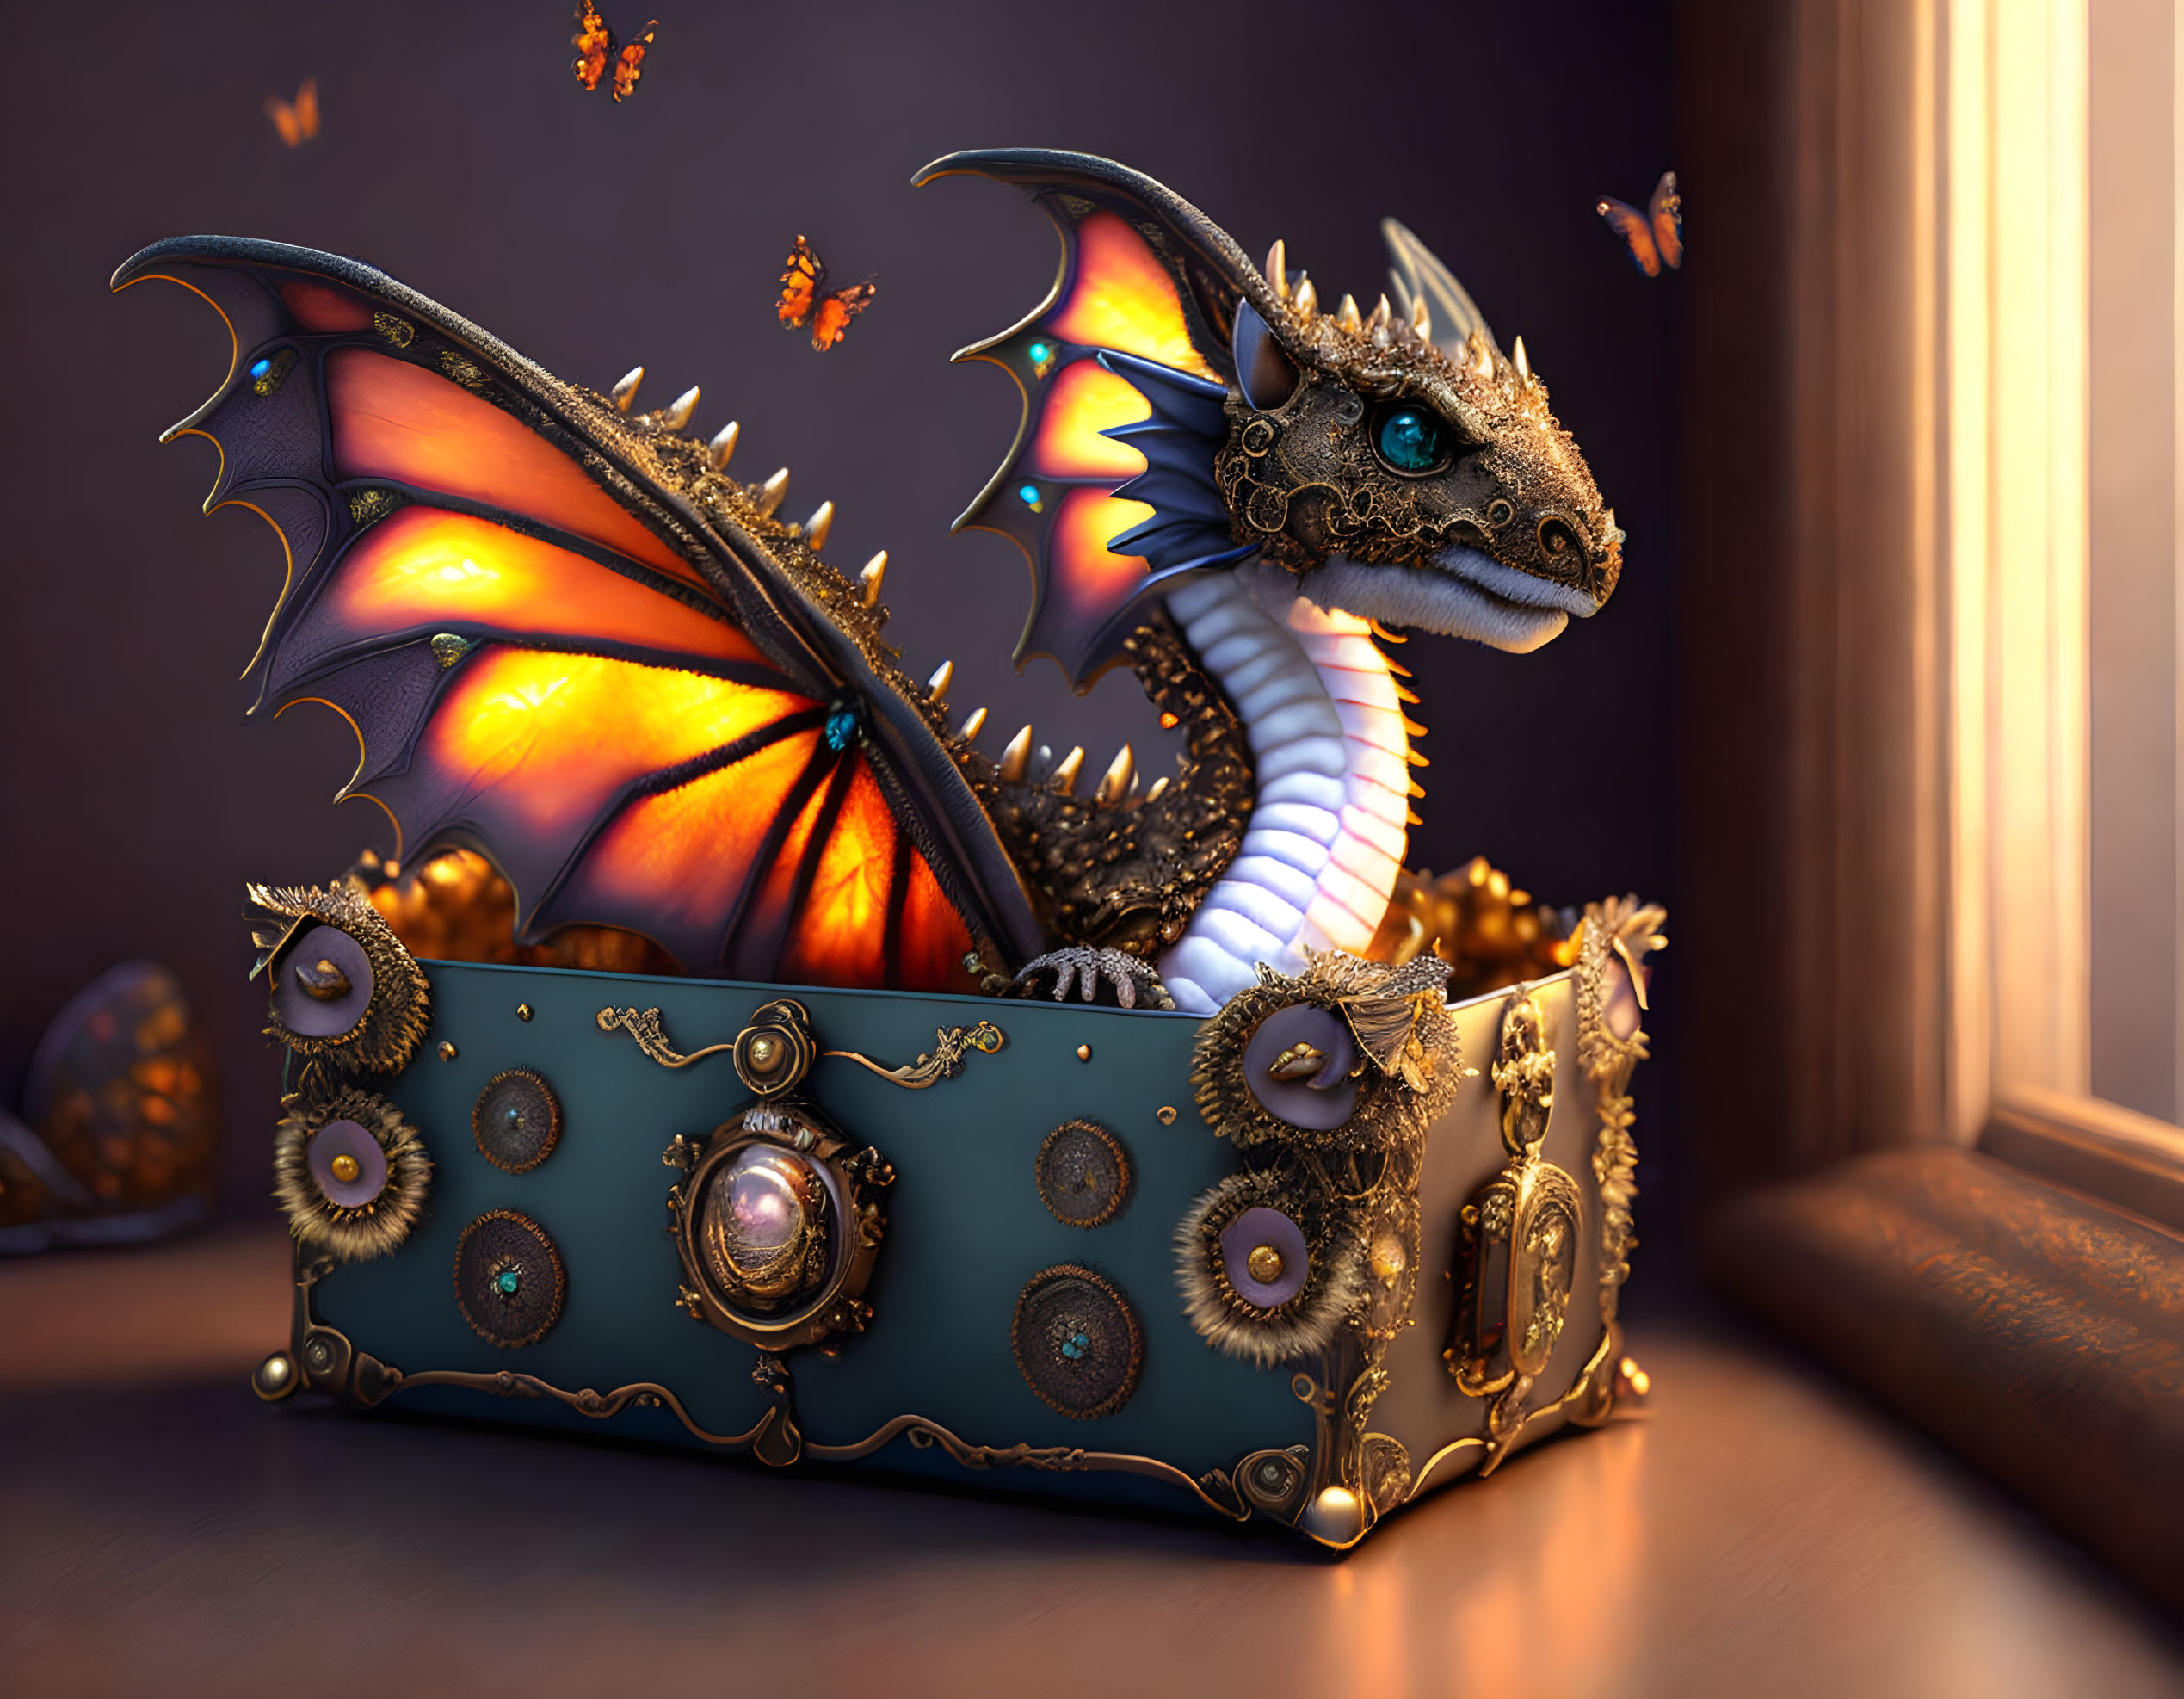 Vibrant dragon artwork perched on treasure chest with fiery dragons.